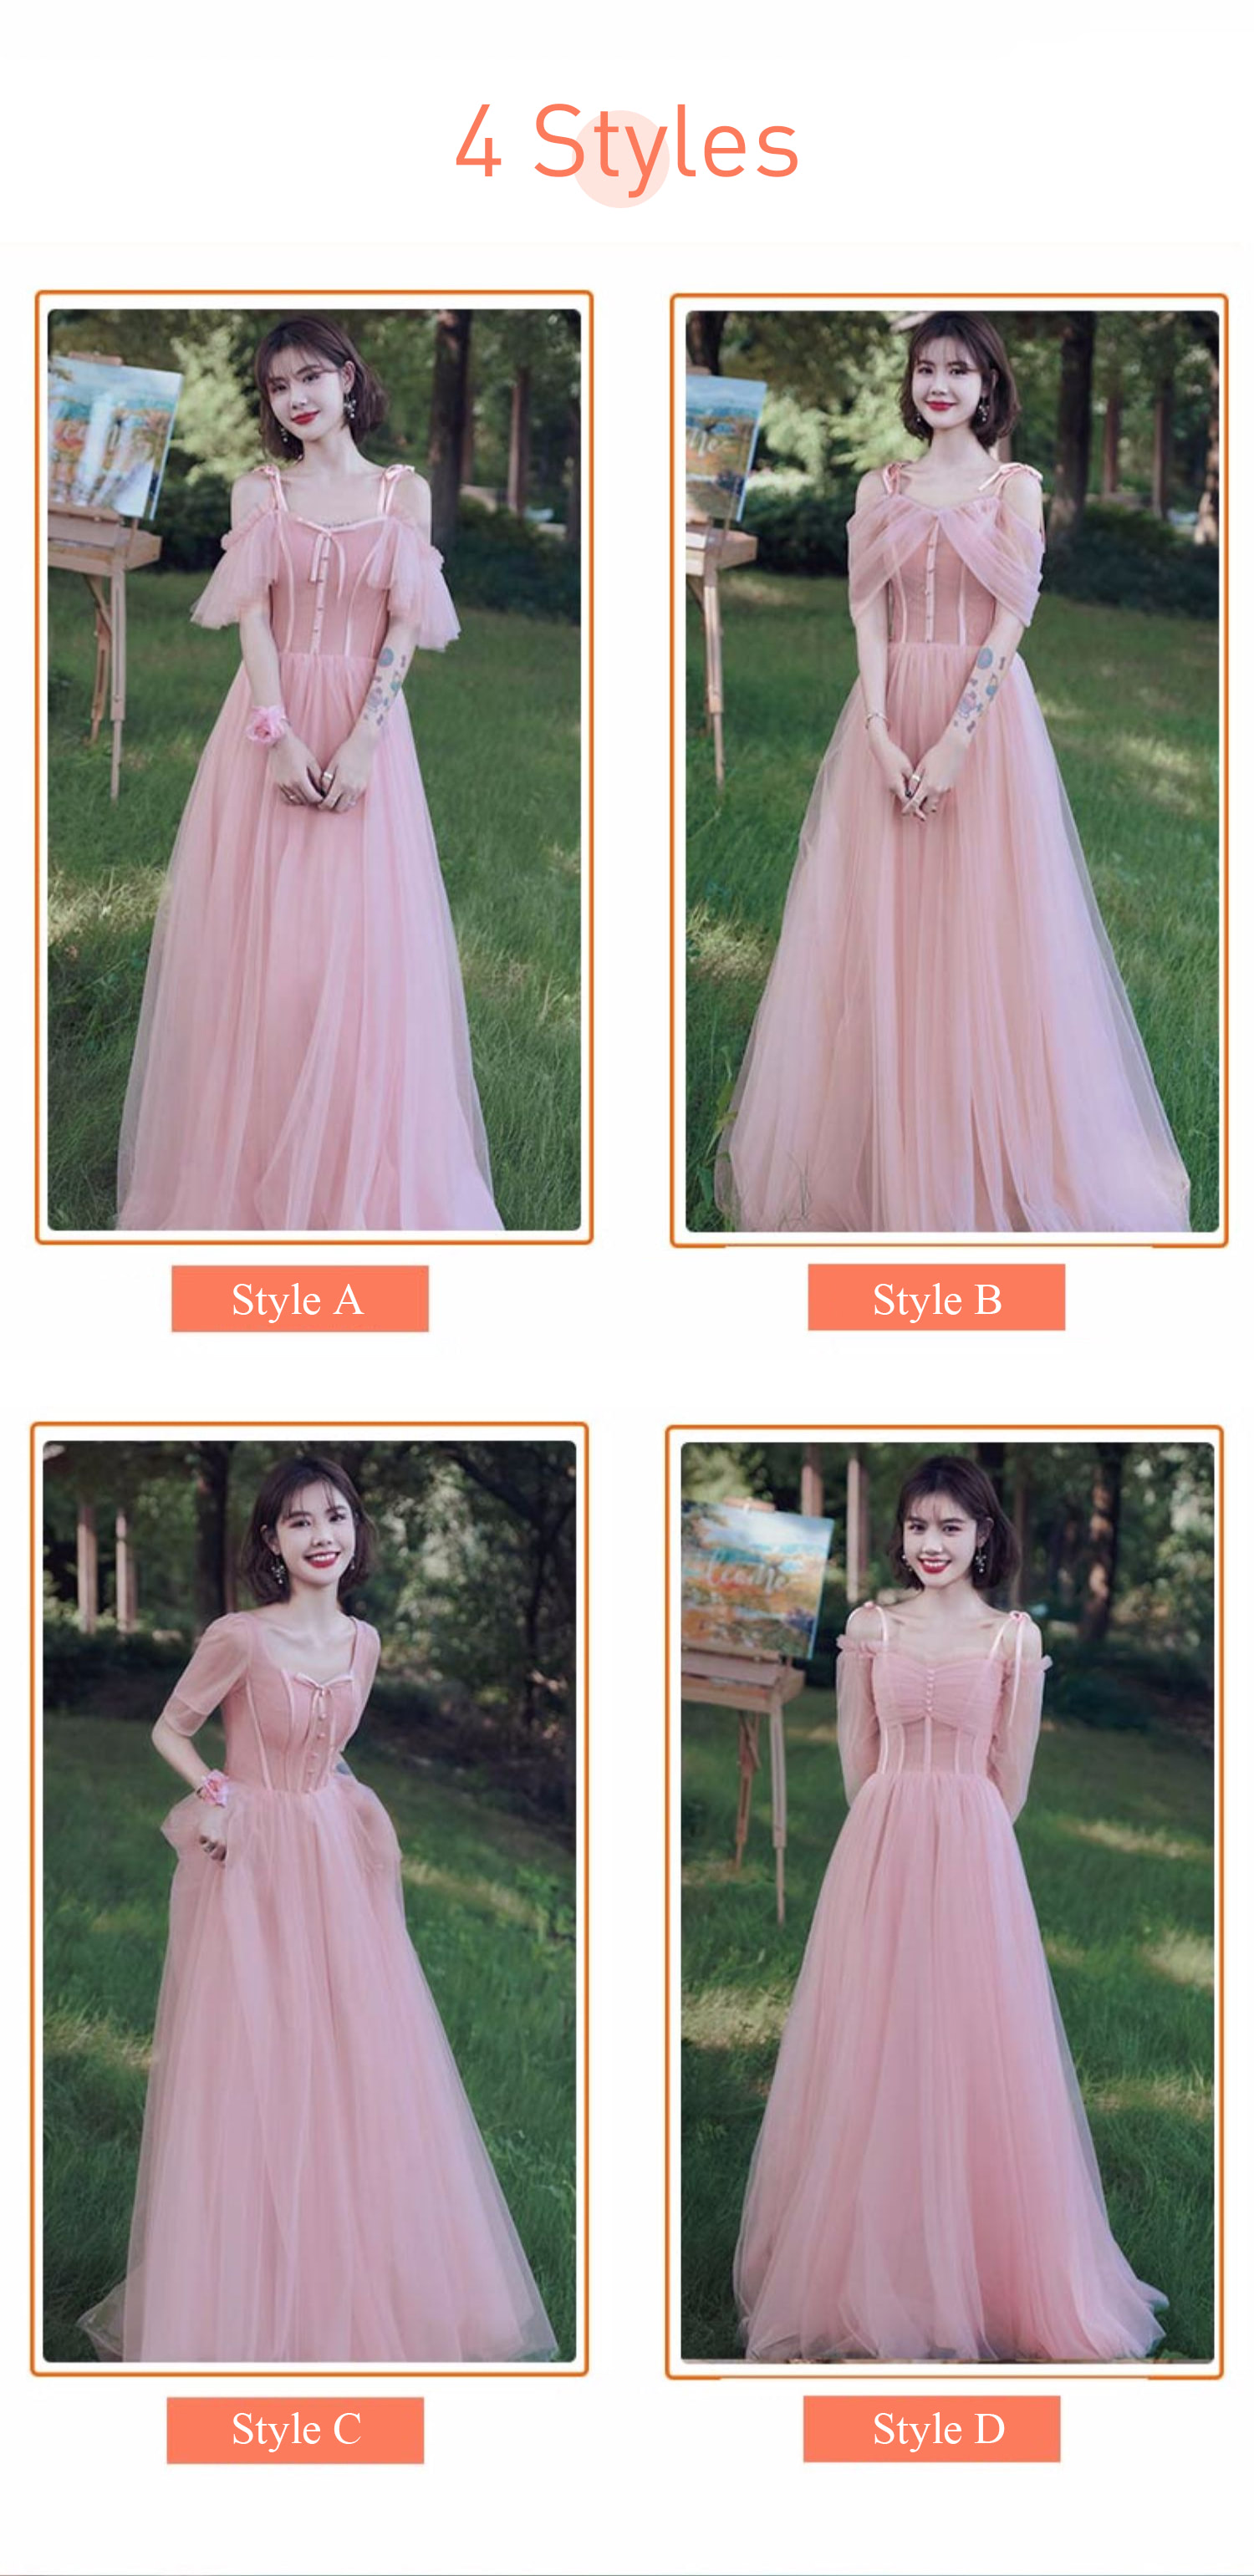 Feminine-Sweet-Pink-Tulle-Bridesmaid-Dress-Prom-Party-Ball-Gown13